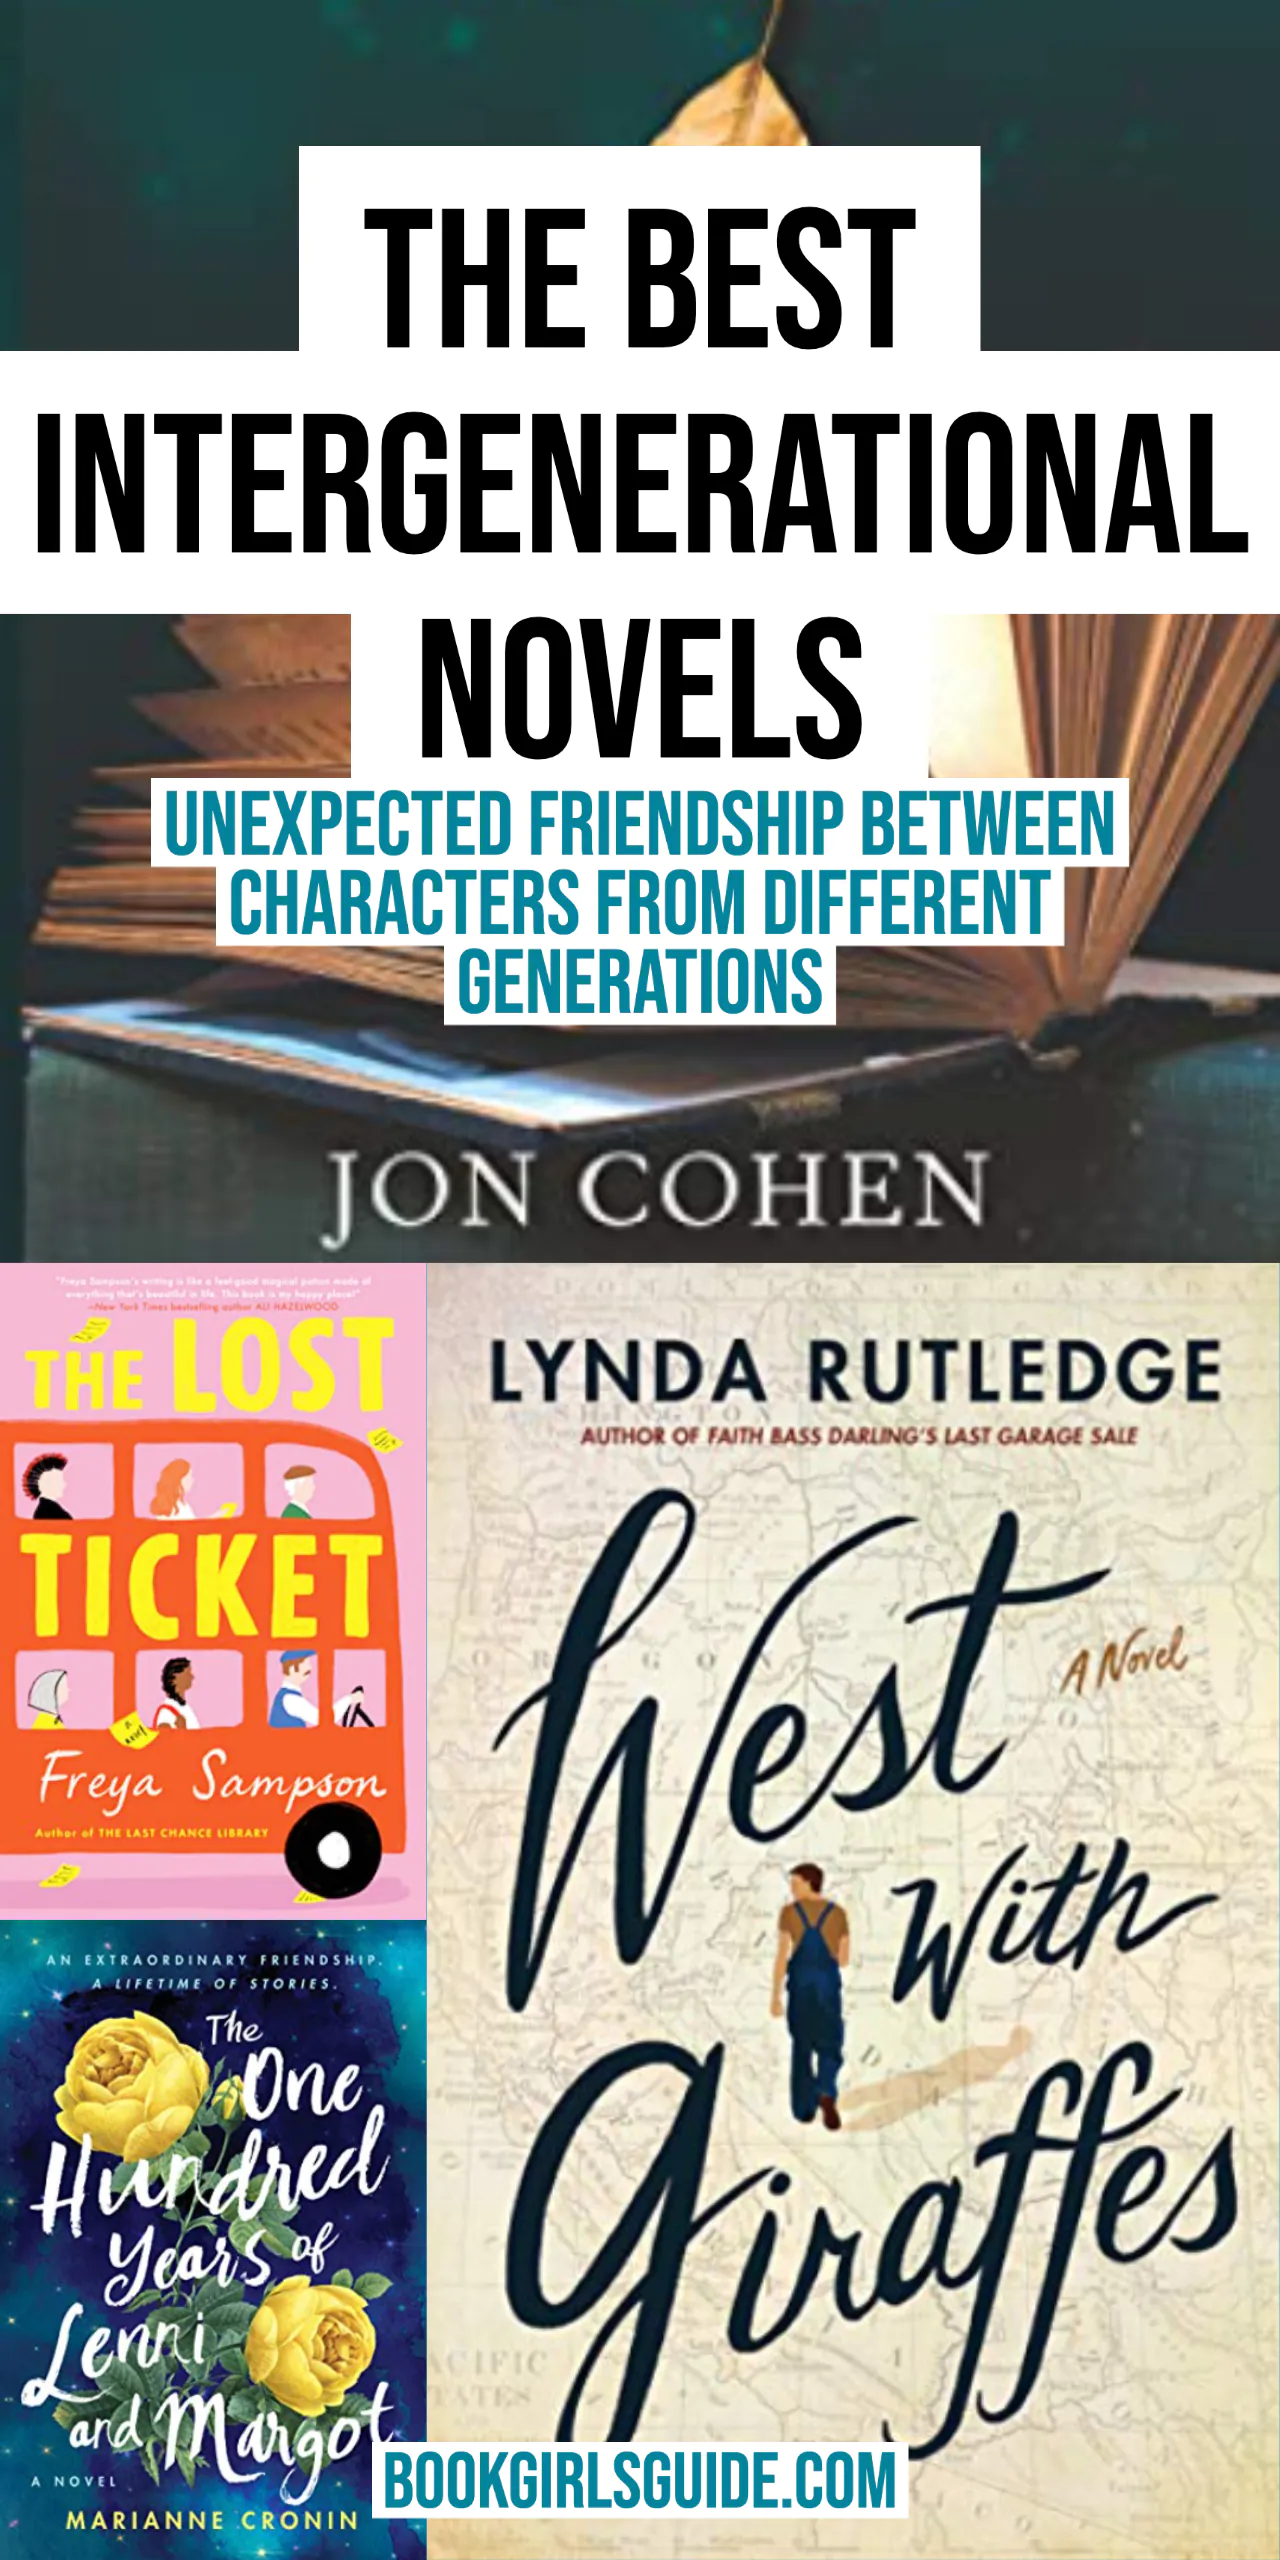 Text reading "The Best Intergenerational Novels" over book covers